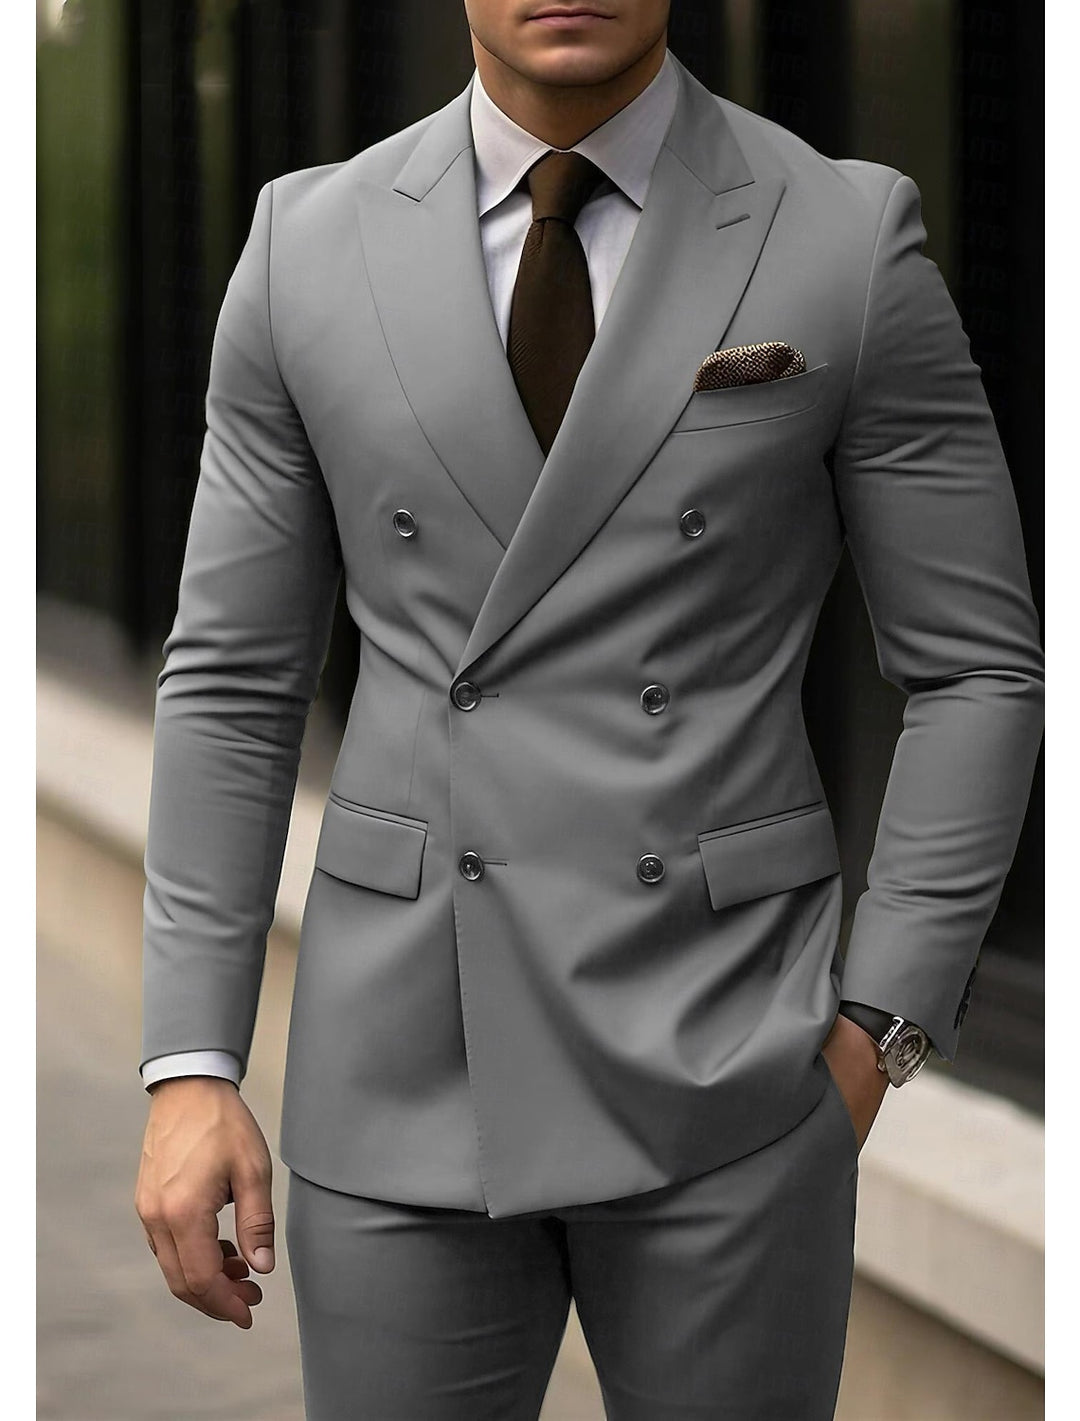 Men's Tailored Fit Double Breasted Six-buttons 2 Pieces Light Grey Formal Suit Wedding Suits